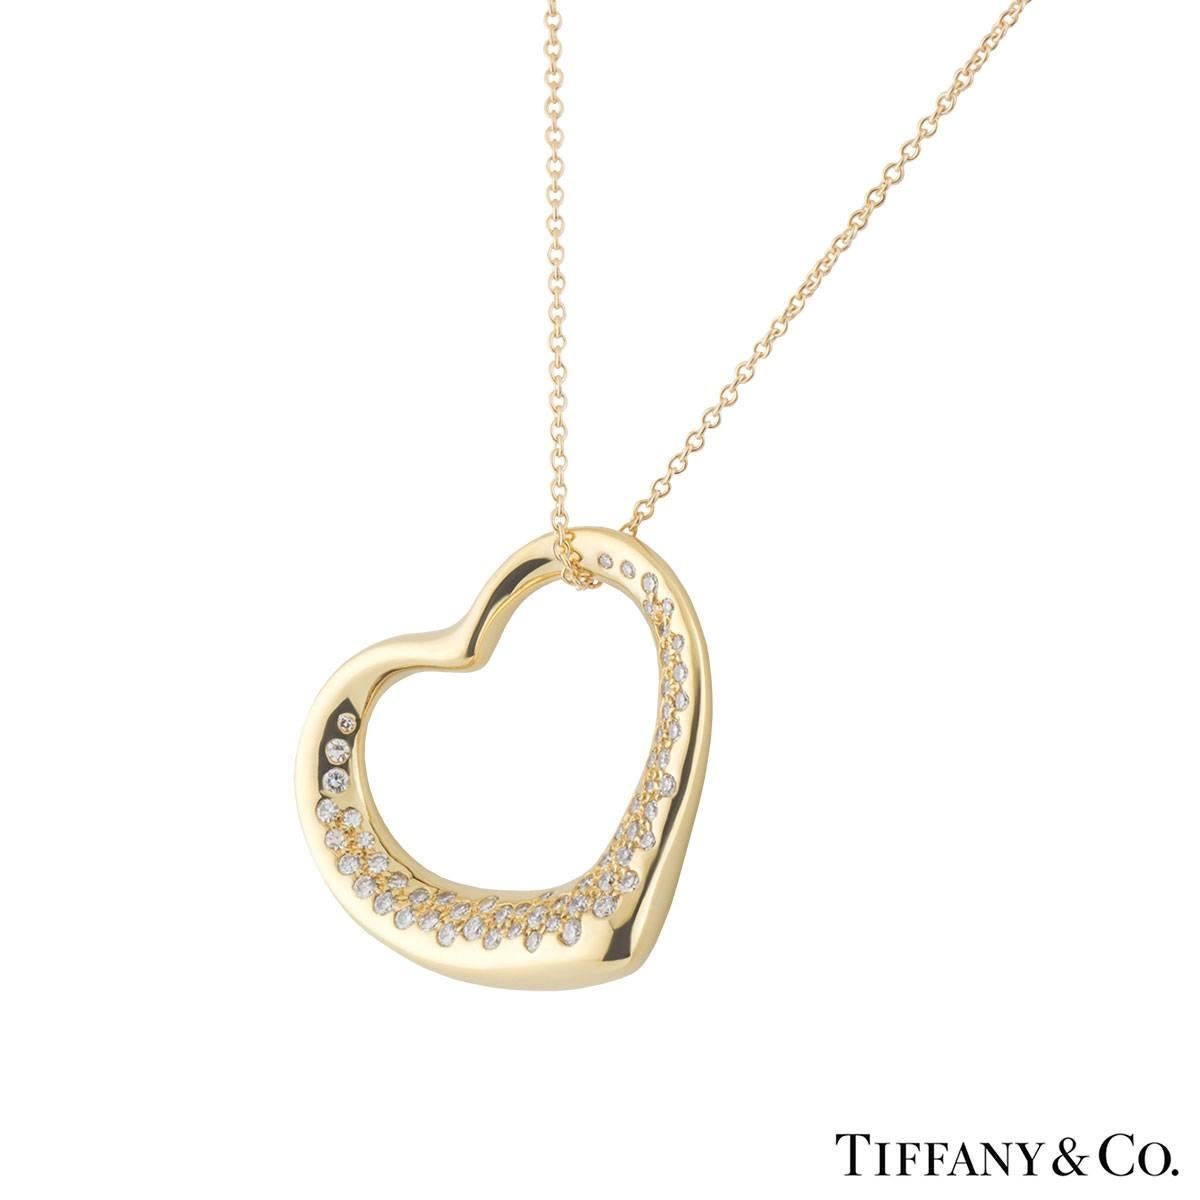 A beautiful 18k yellow gold diamond Tiffany & Co. heart necklace from the Elsa Peretti Open Hearts collection. The necklace comprises of an open work heart motif with round brilliant cut diamonds. The diamonds have a total weight of approximately